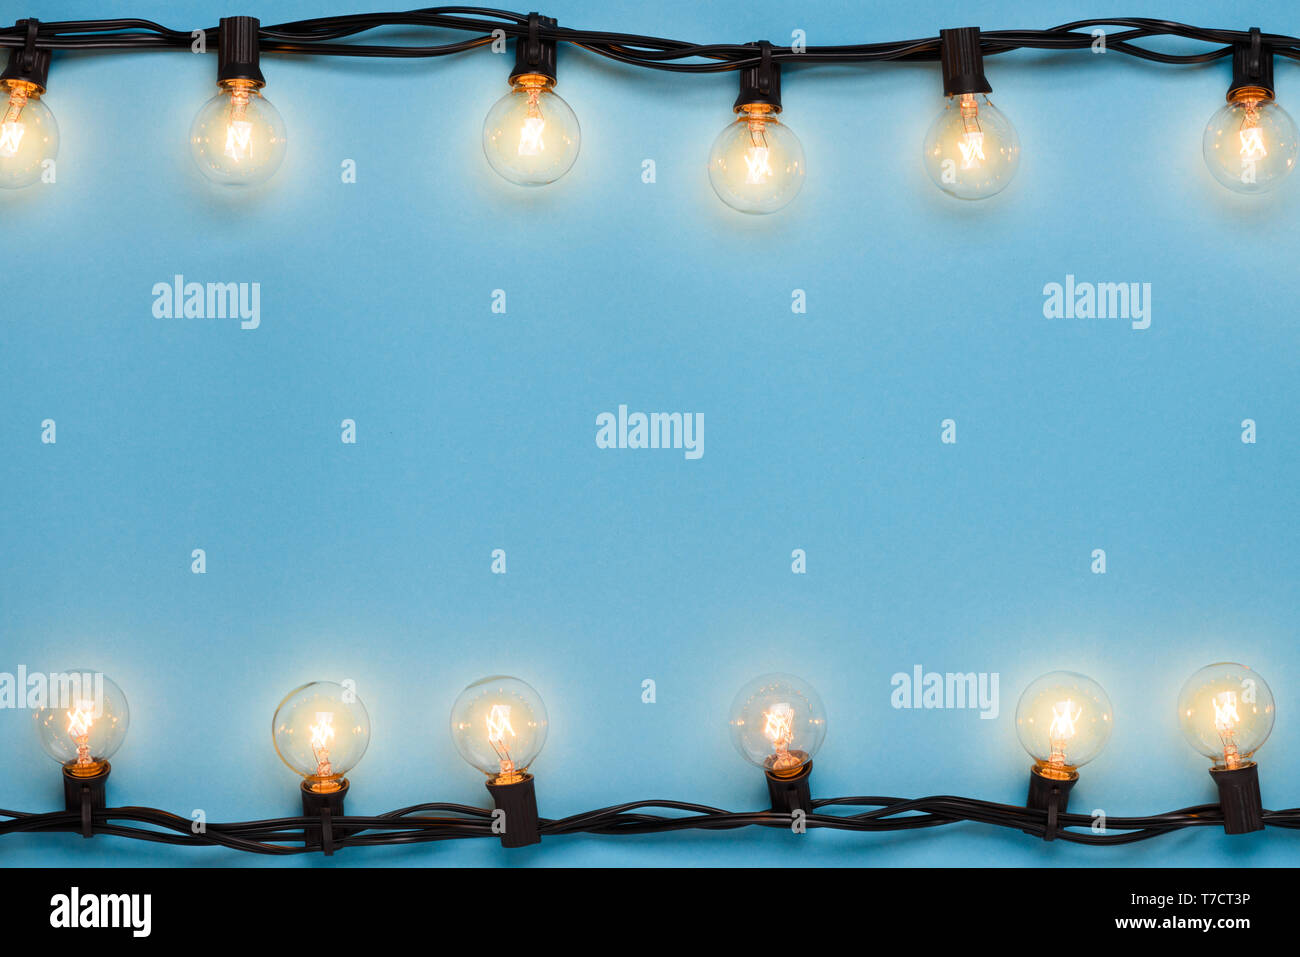 Garlands of lamps warm light edison lights on blue background with ...